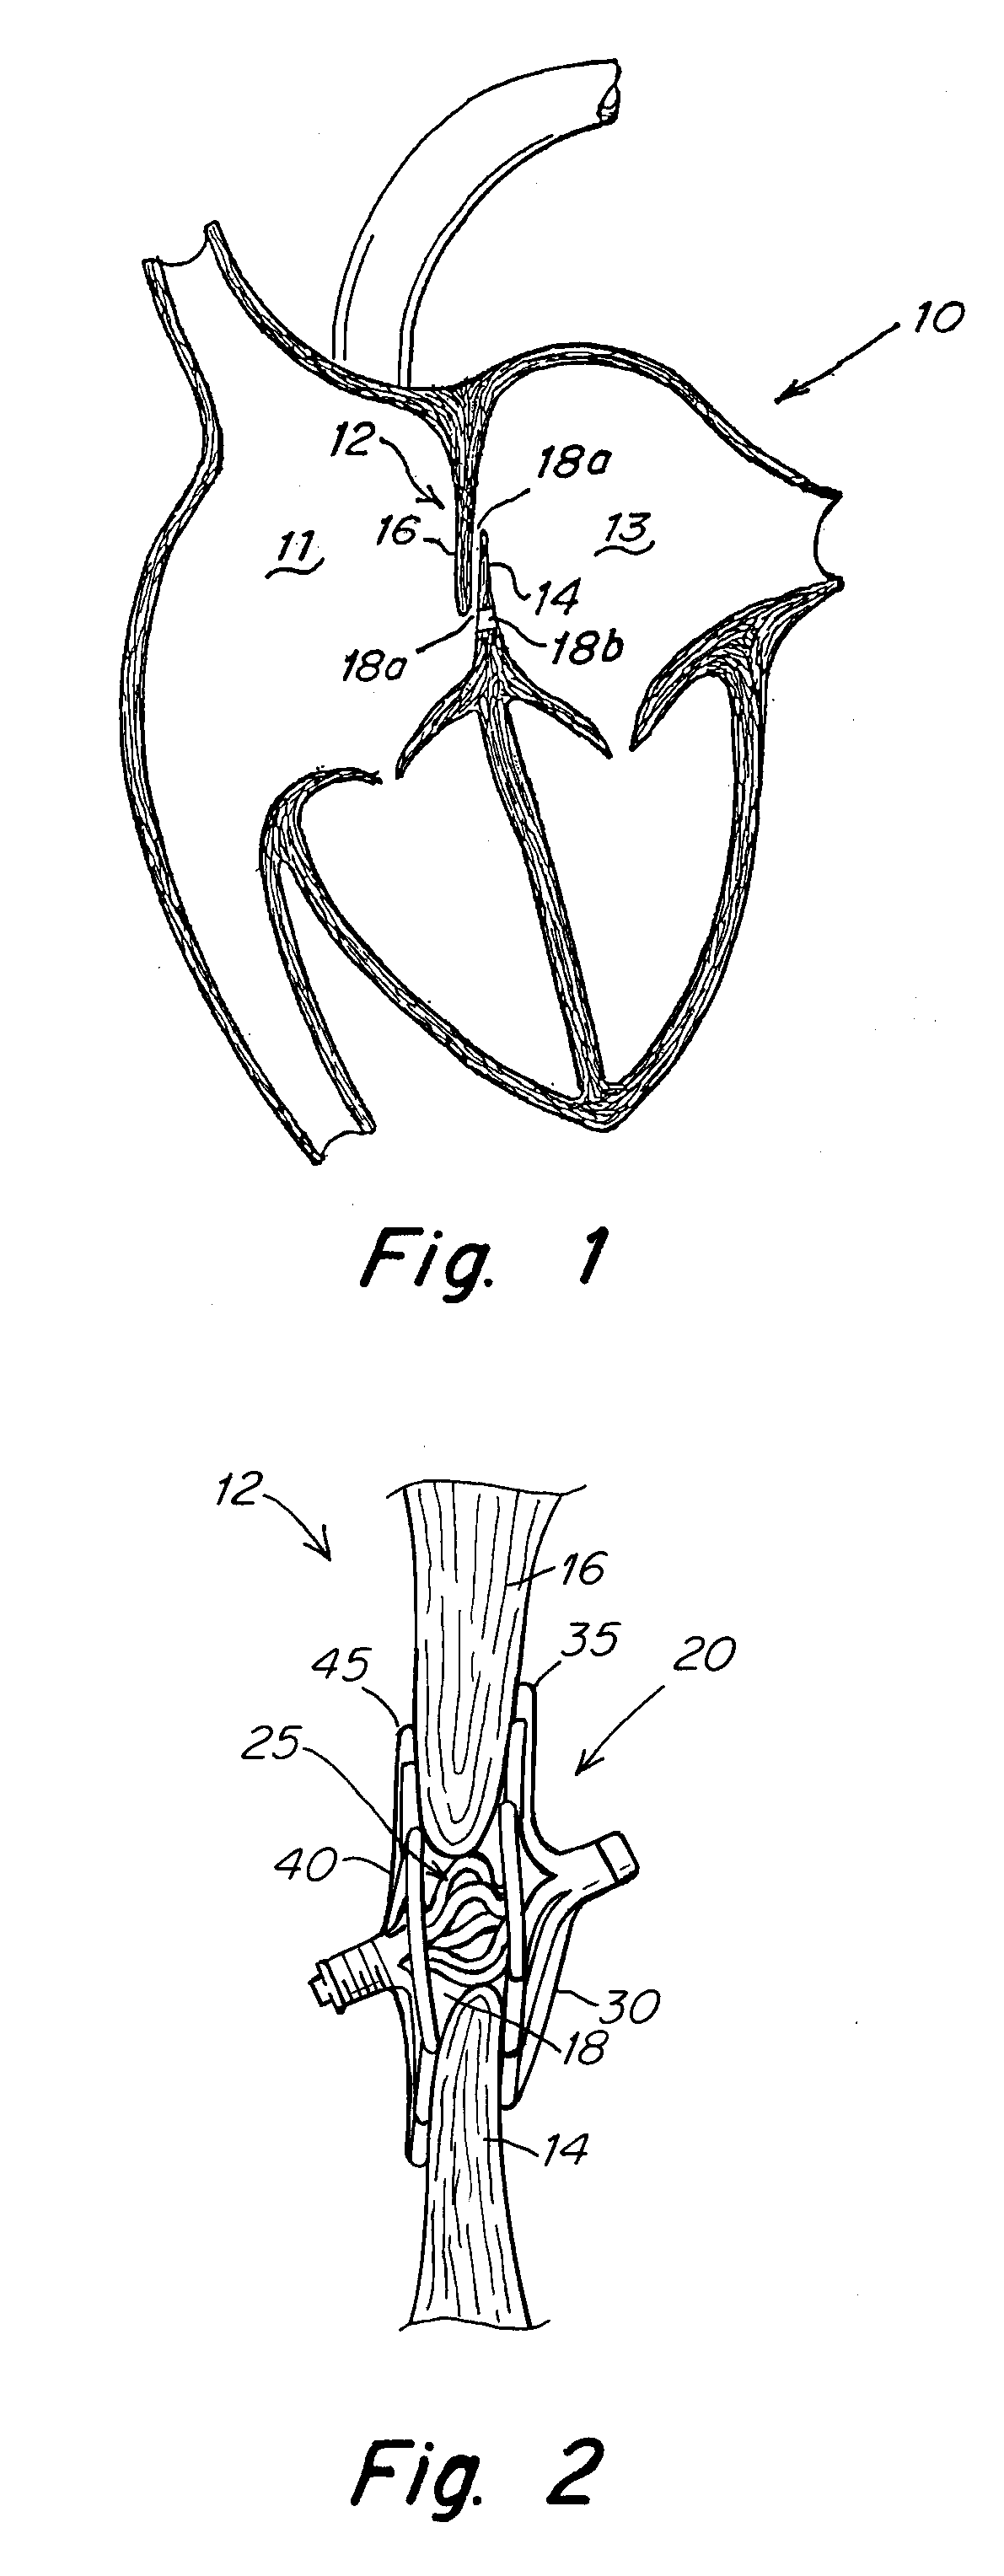 Septal closure device with centering mechanism